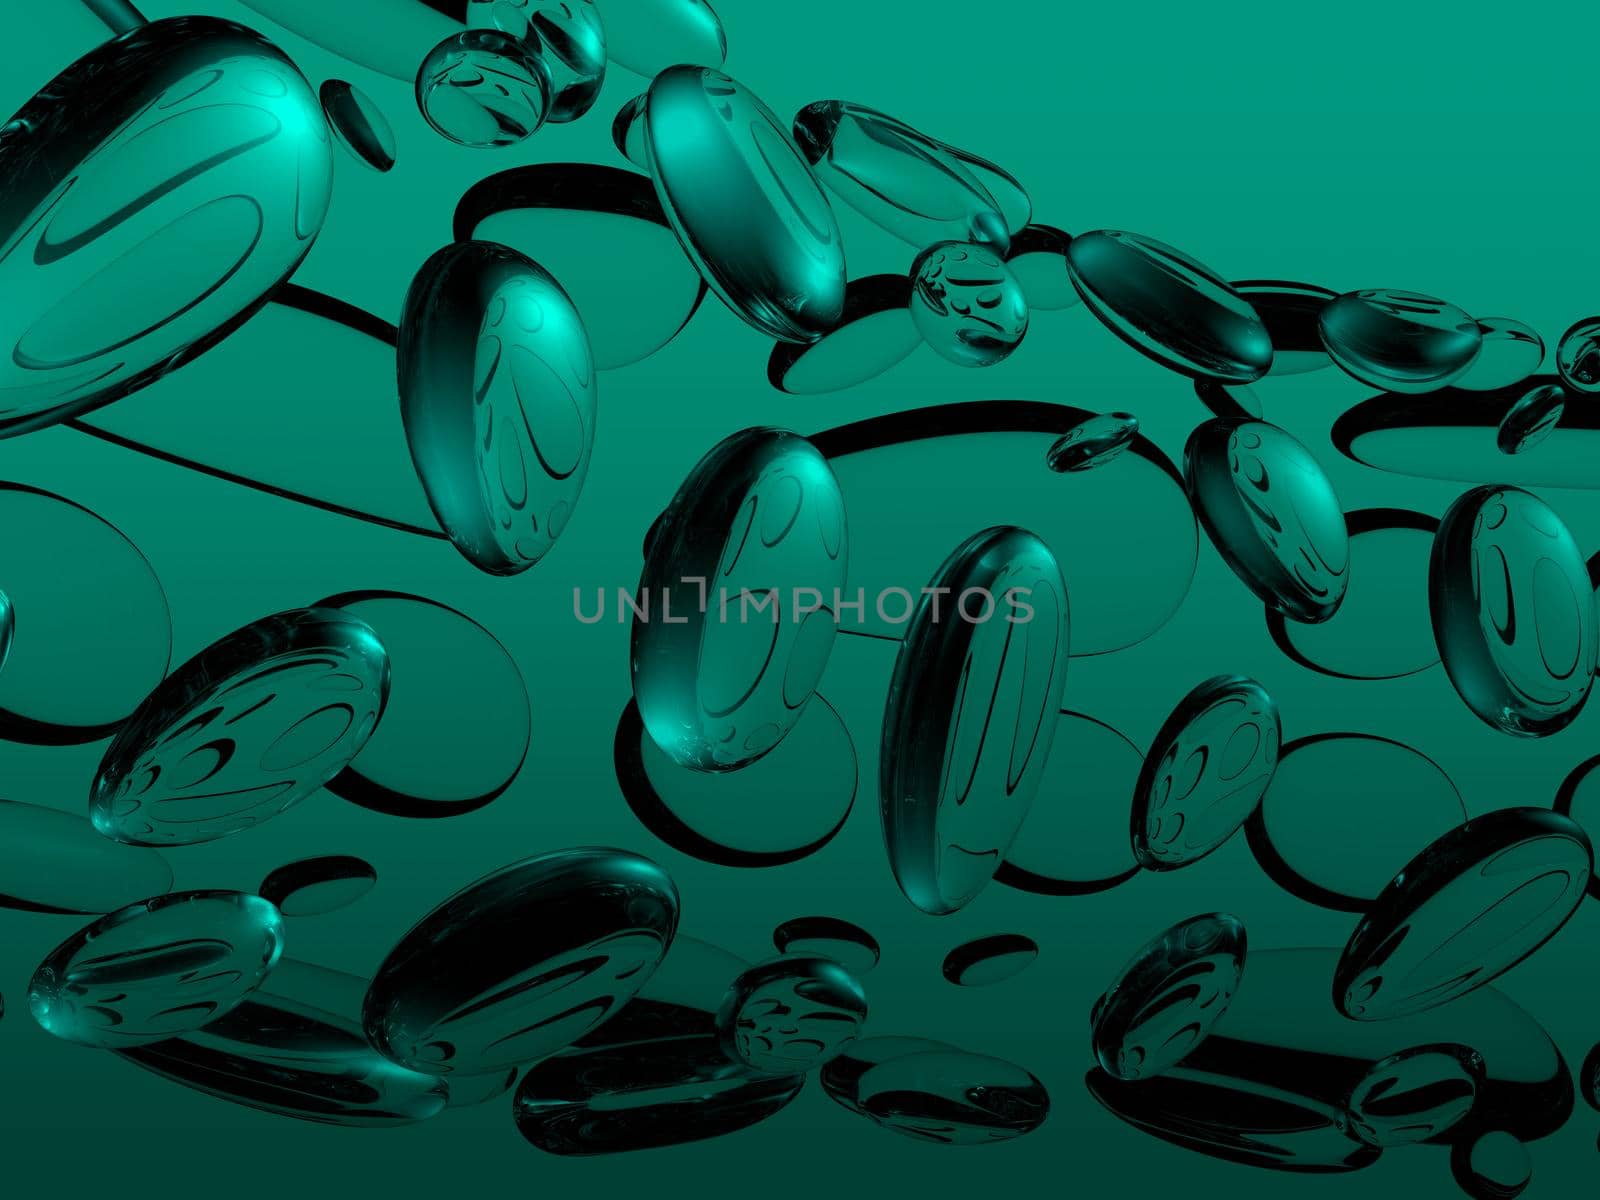 Swirl of water droplets on a turquoise background. Abstract 3D illustration render